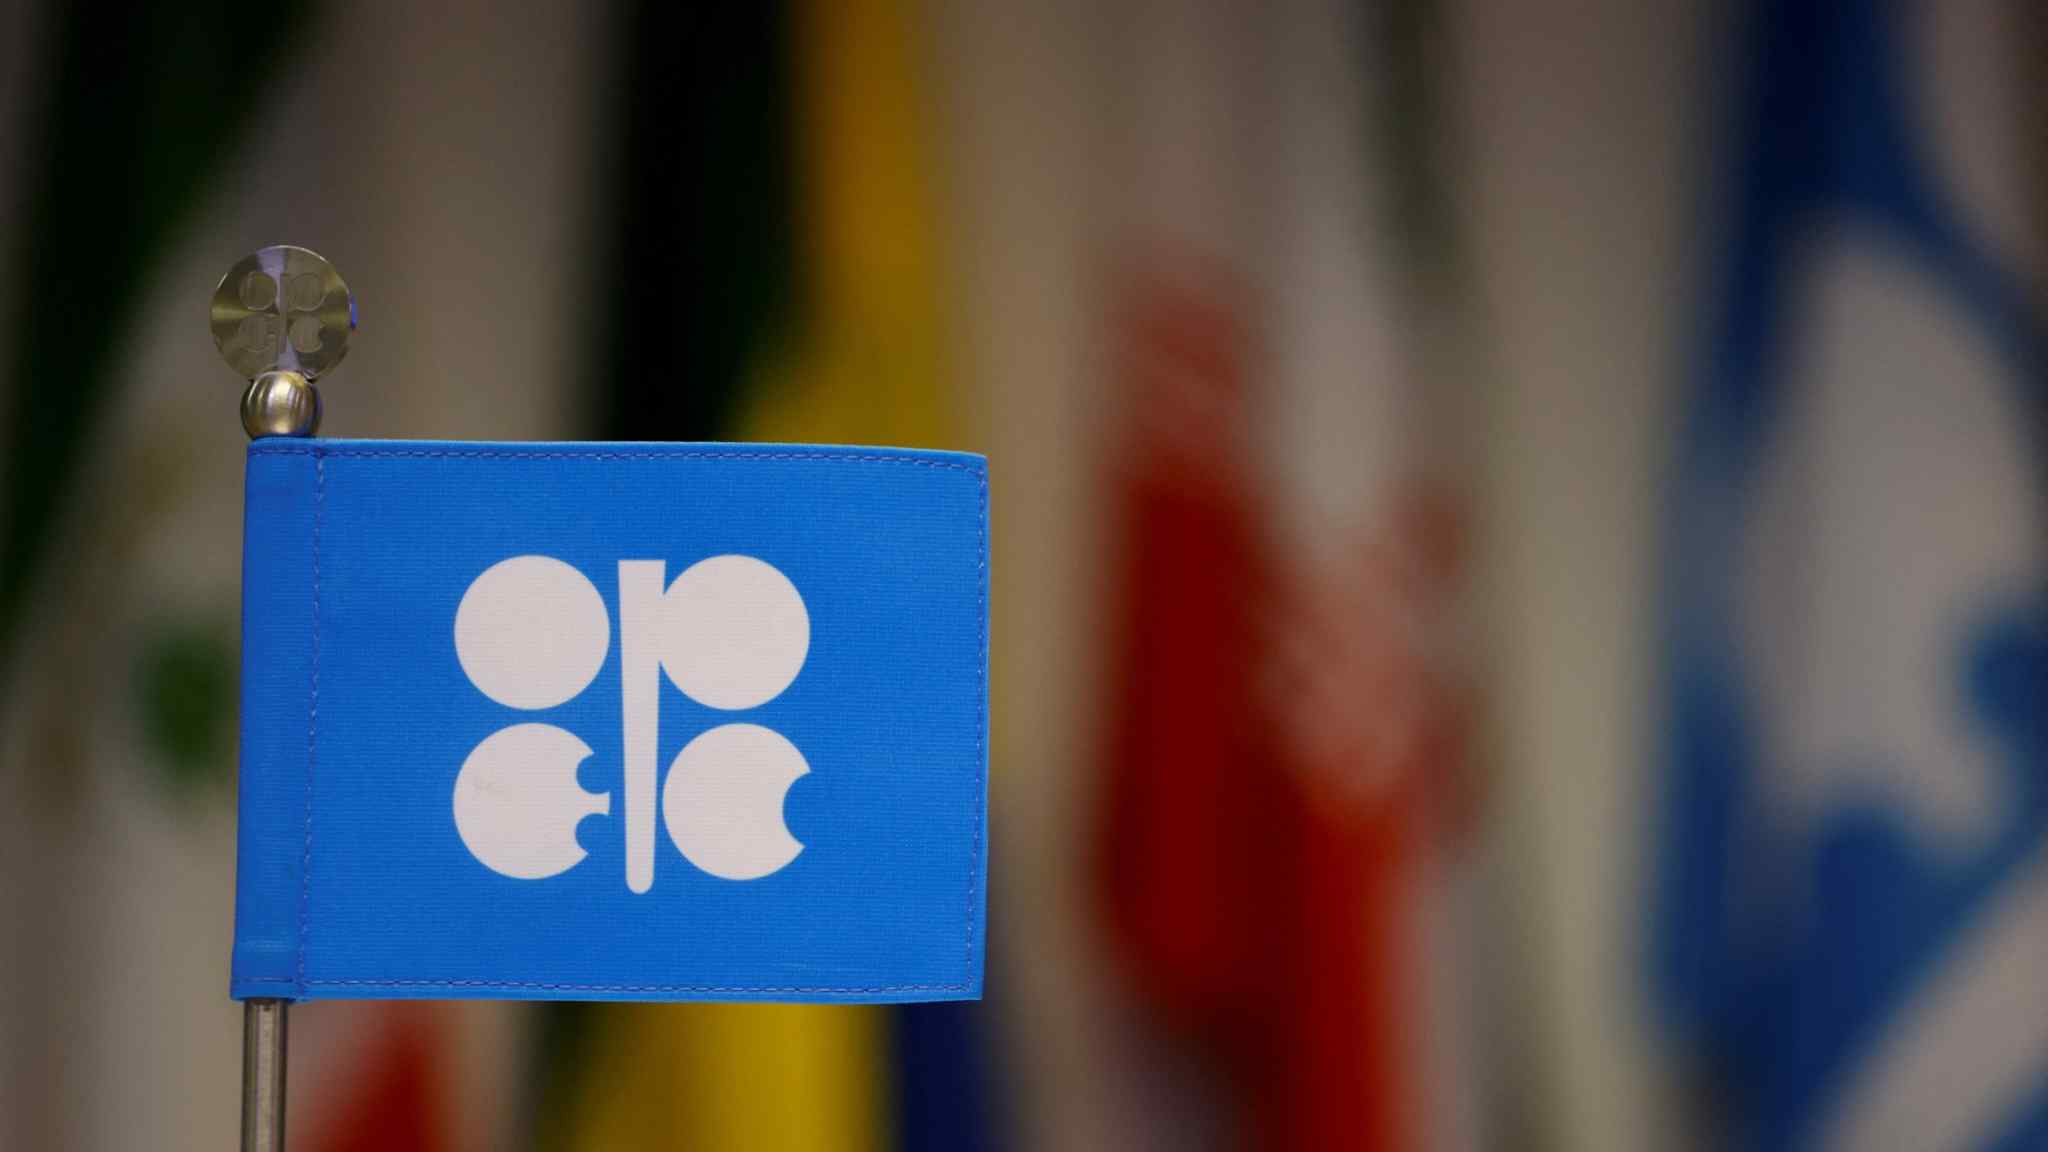 Opec+ says ready to adjust oil output as Russia embargo looms